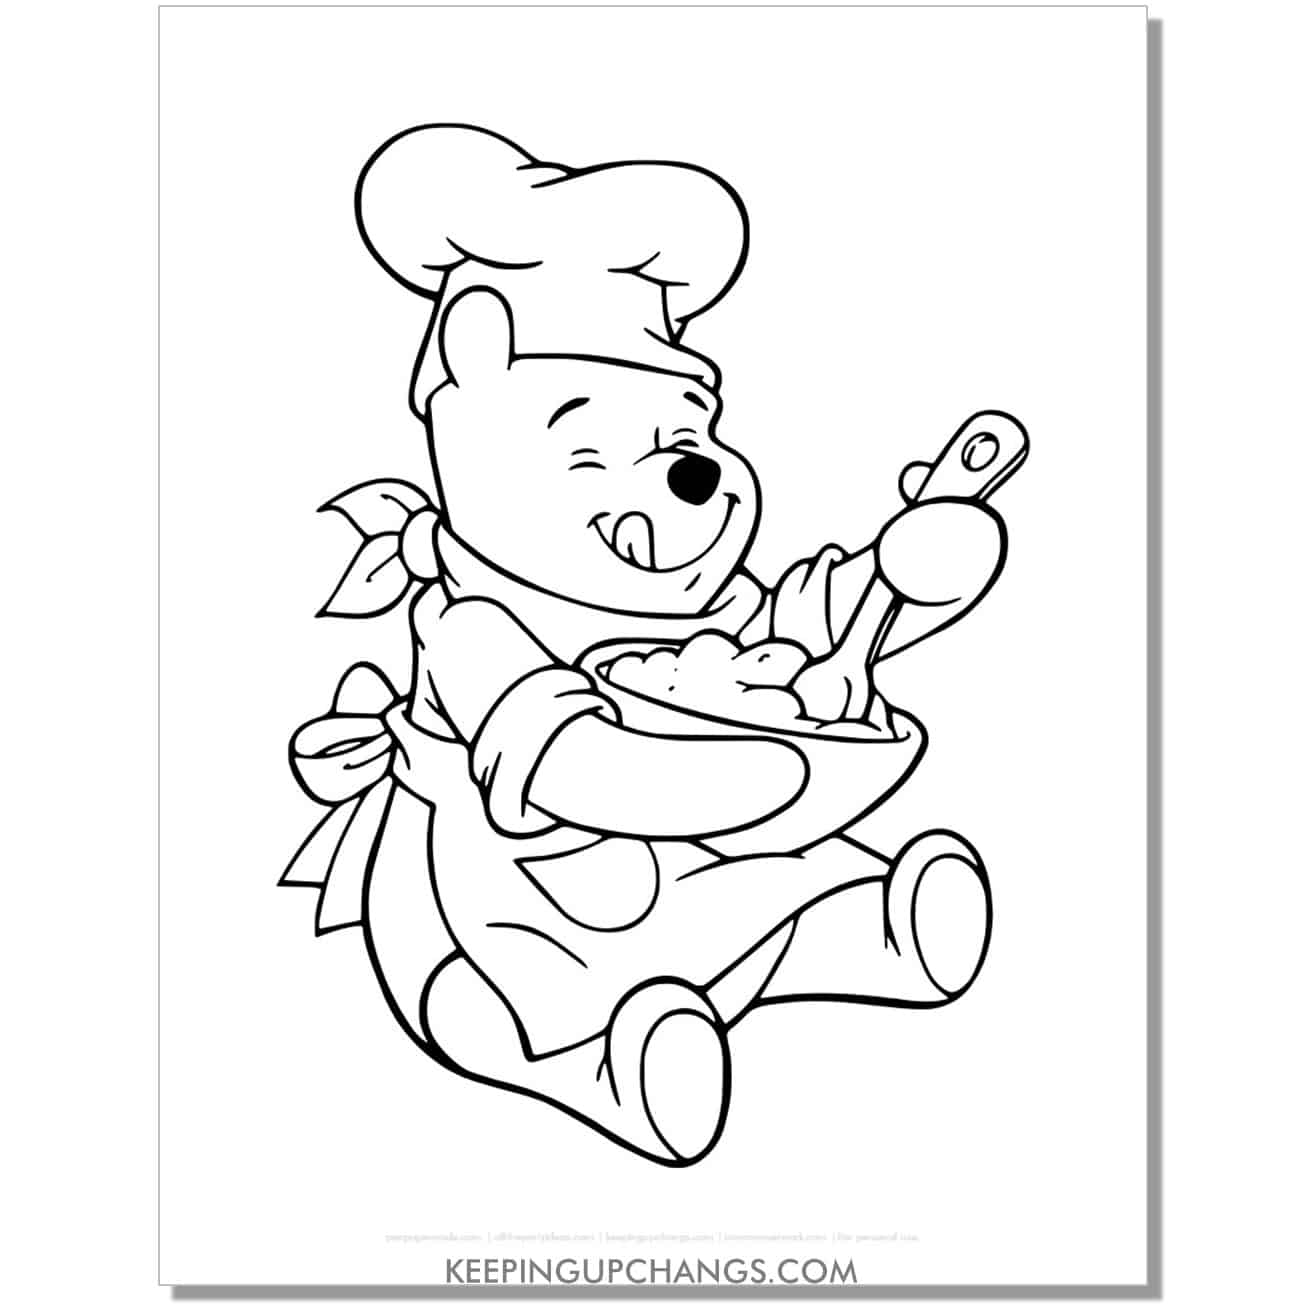 winnie the pooh mixing batter coloring page, sheet.